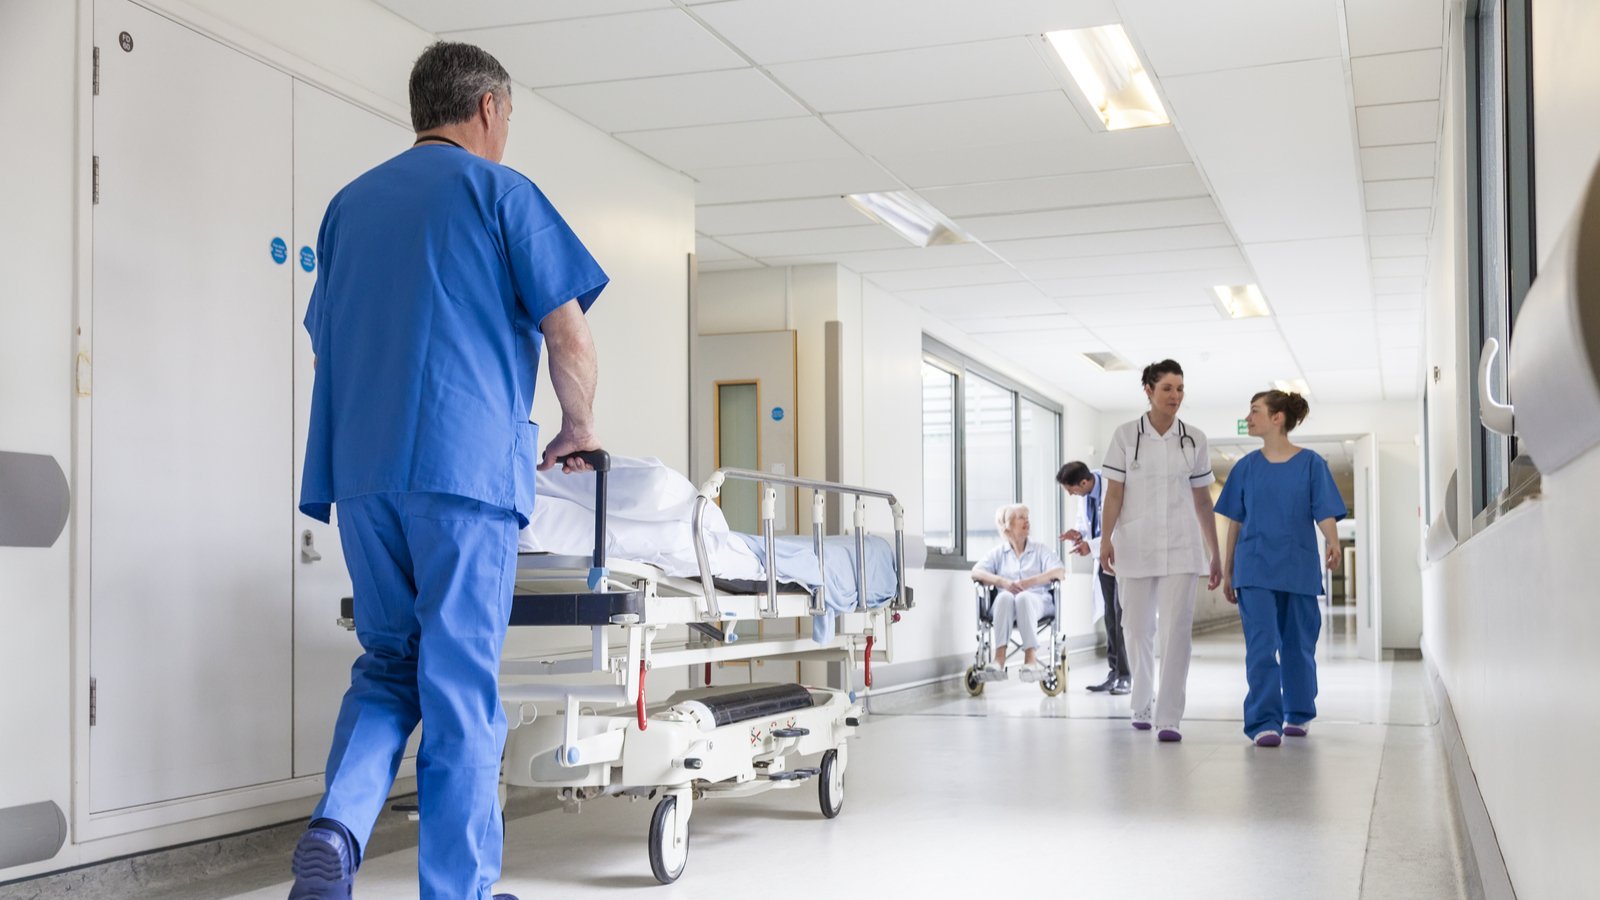 NAOV Stock Image of a hospital with workers walking in the halls 